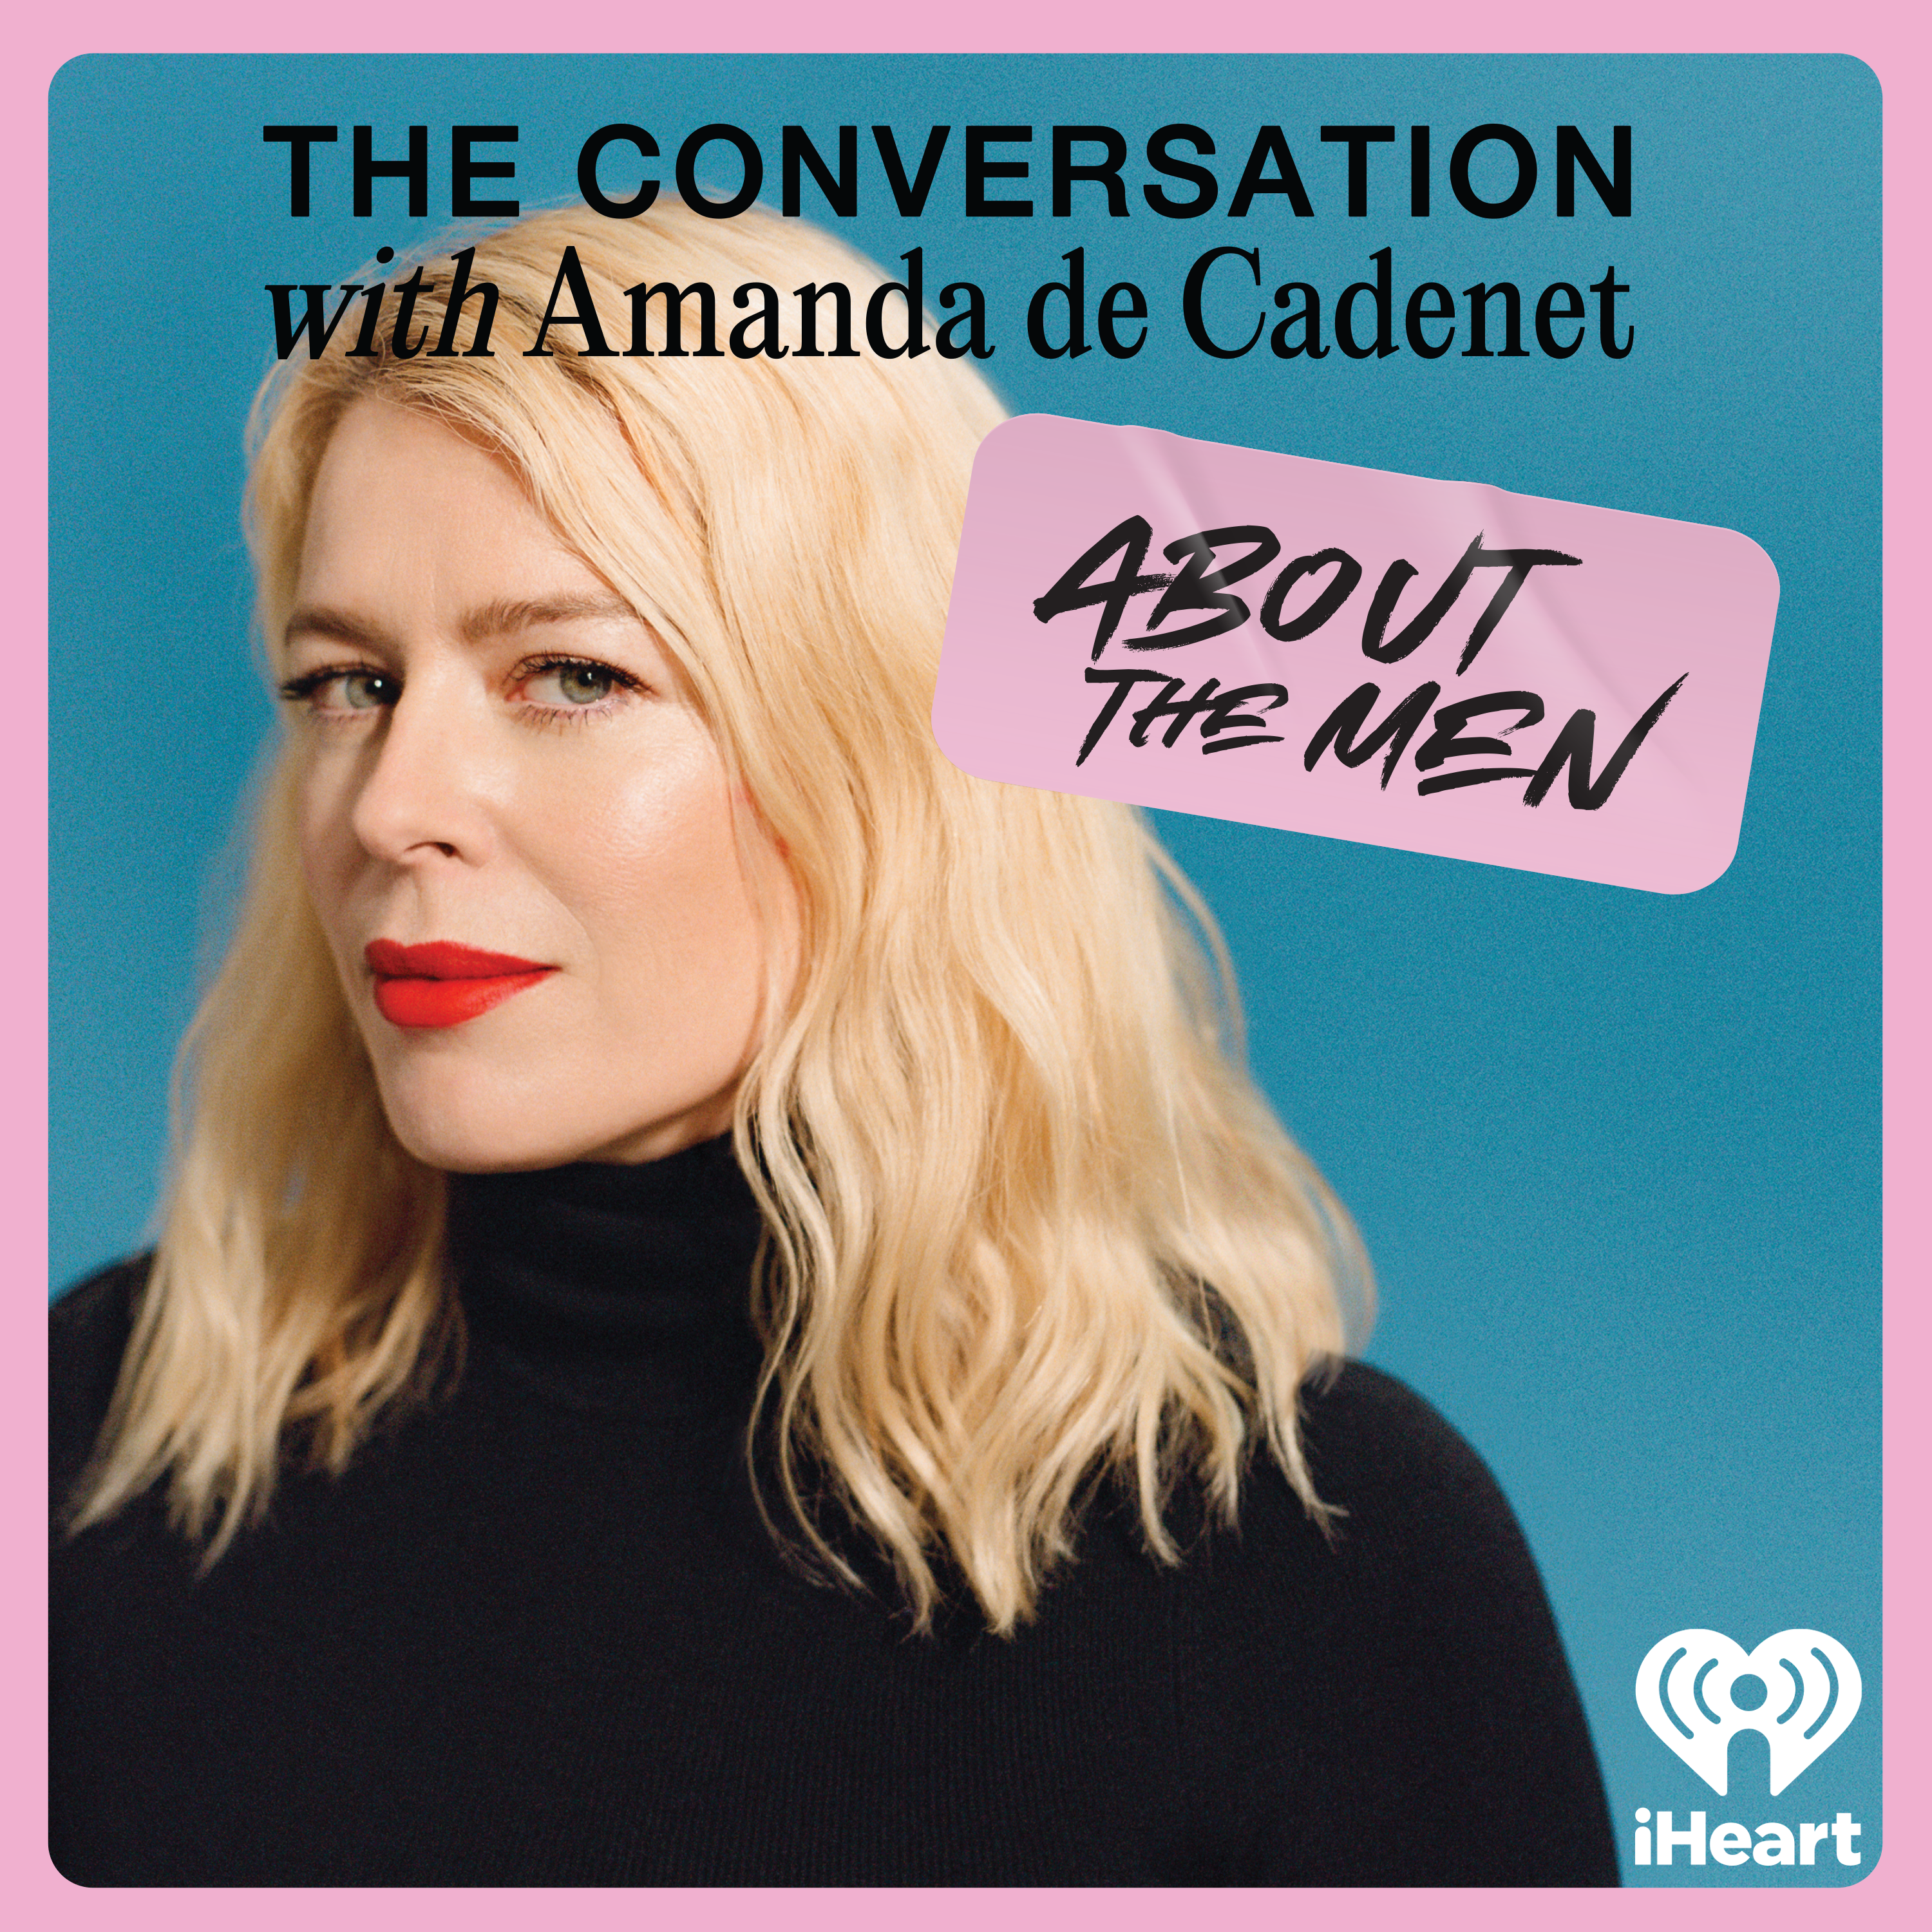 The Conversation: About The Men | iHeart